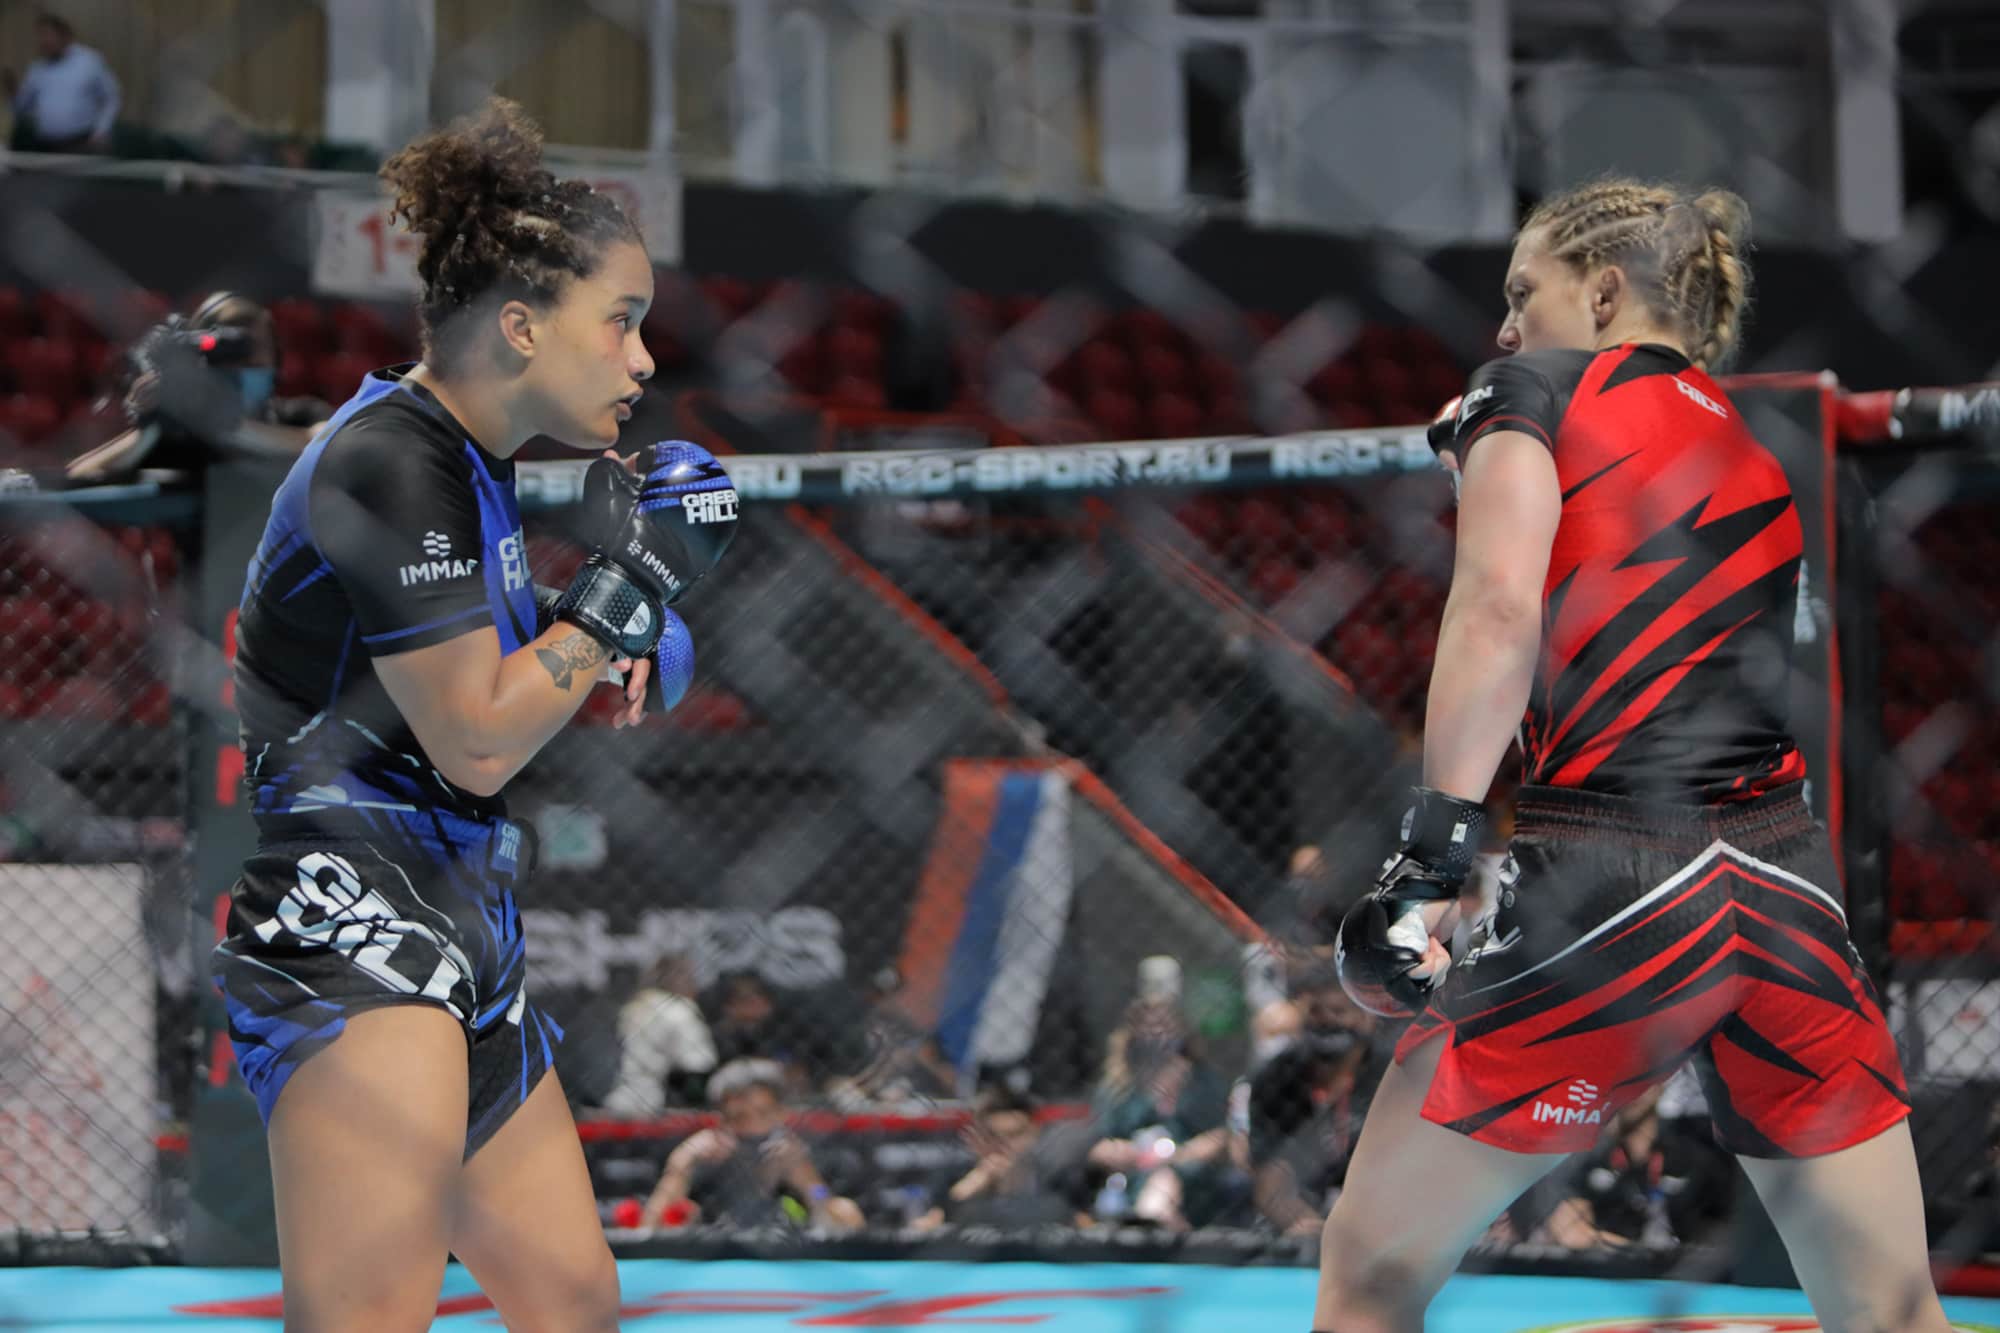 Sabrina De Sousa to rematch Michelle Montague in featherweight semifinals of 2021 World Championships